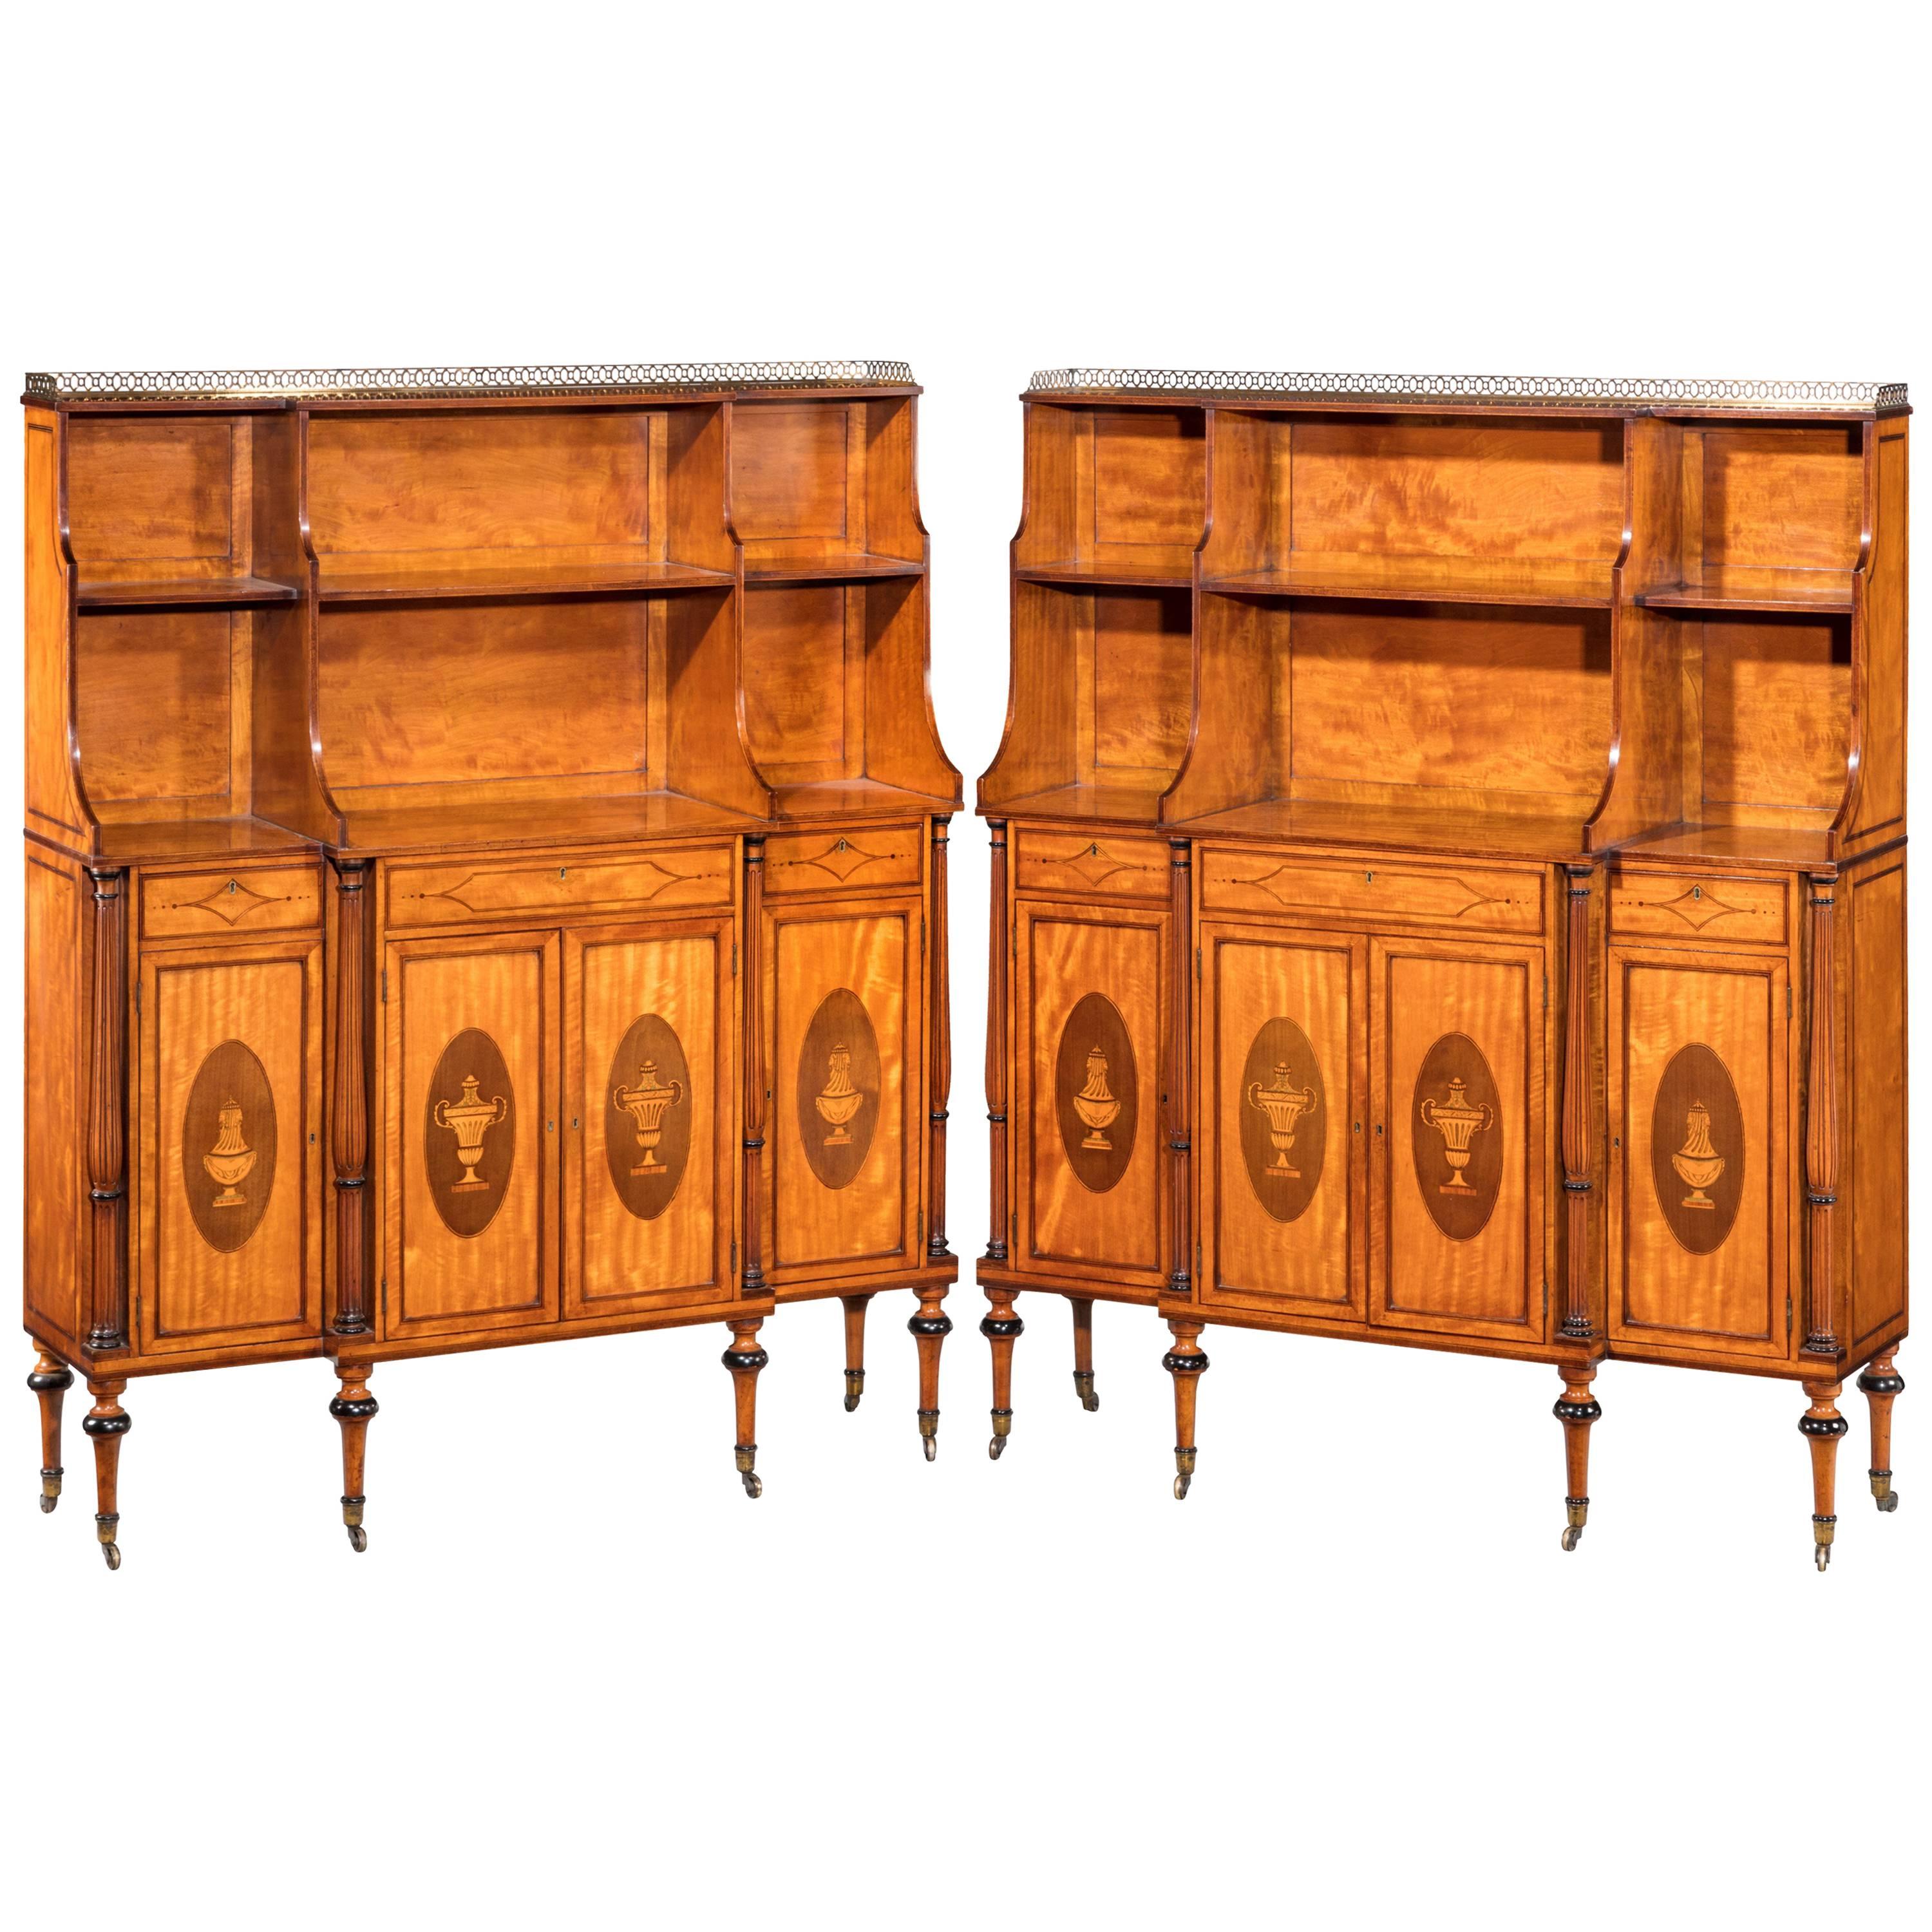 Pair of Late 19th Century Satinwood Dwarf Cabinets